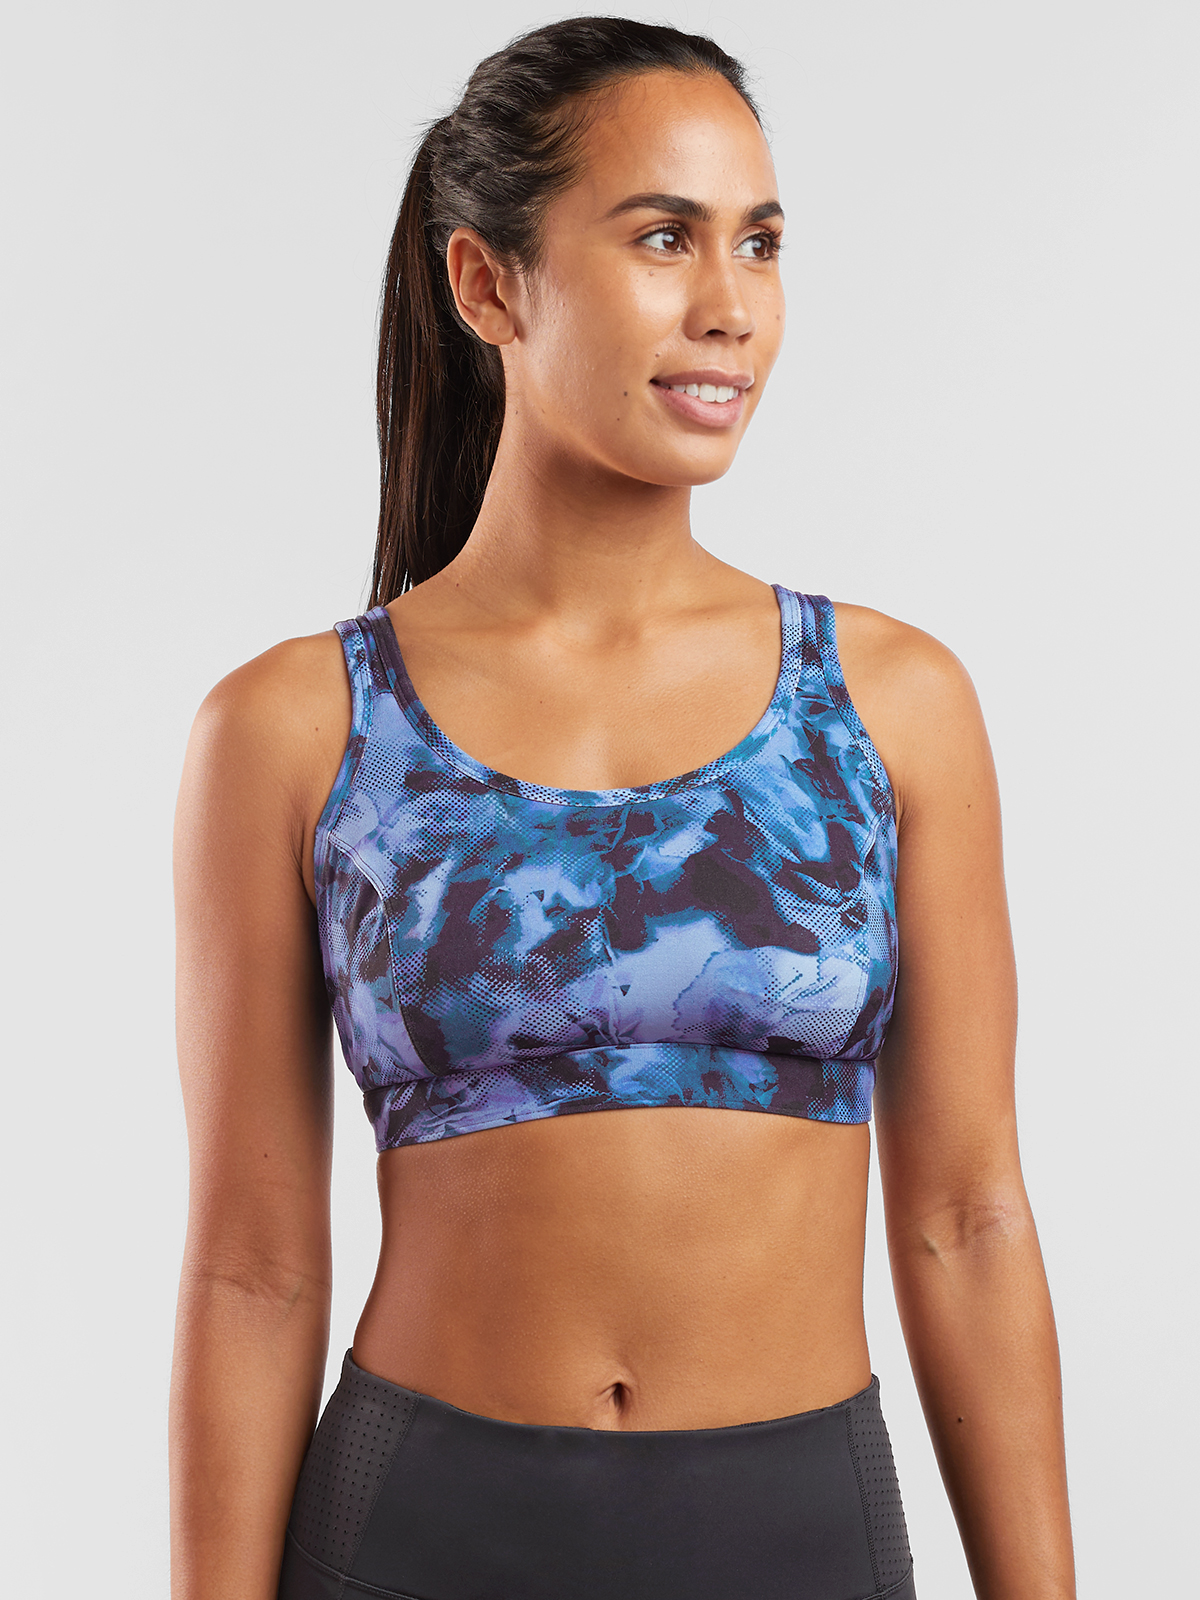 Champion Sport Bras Collection 2 Pack Seamless Top W (VS515)